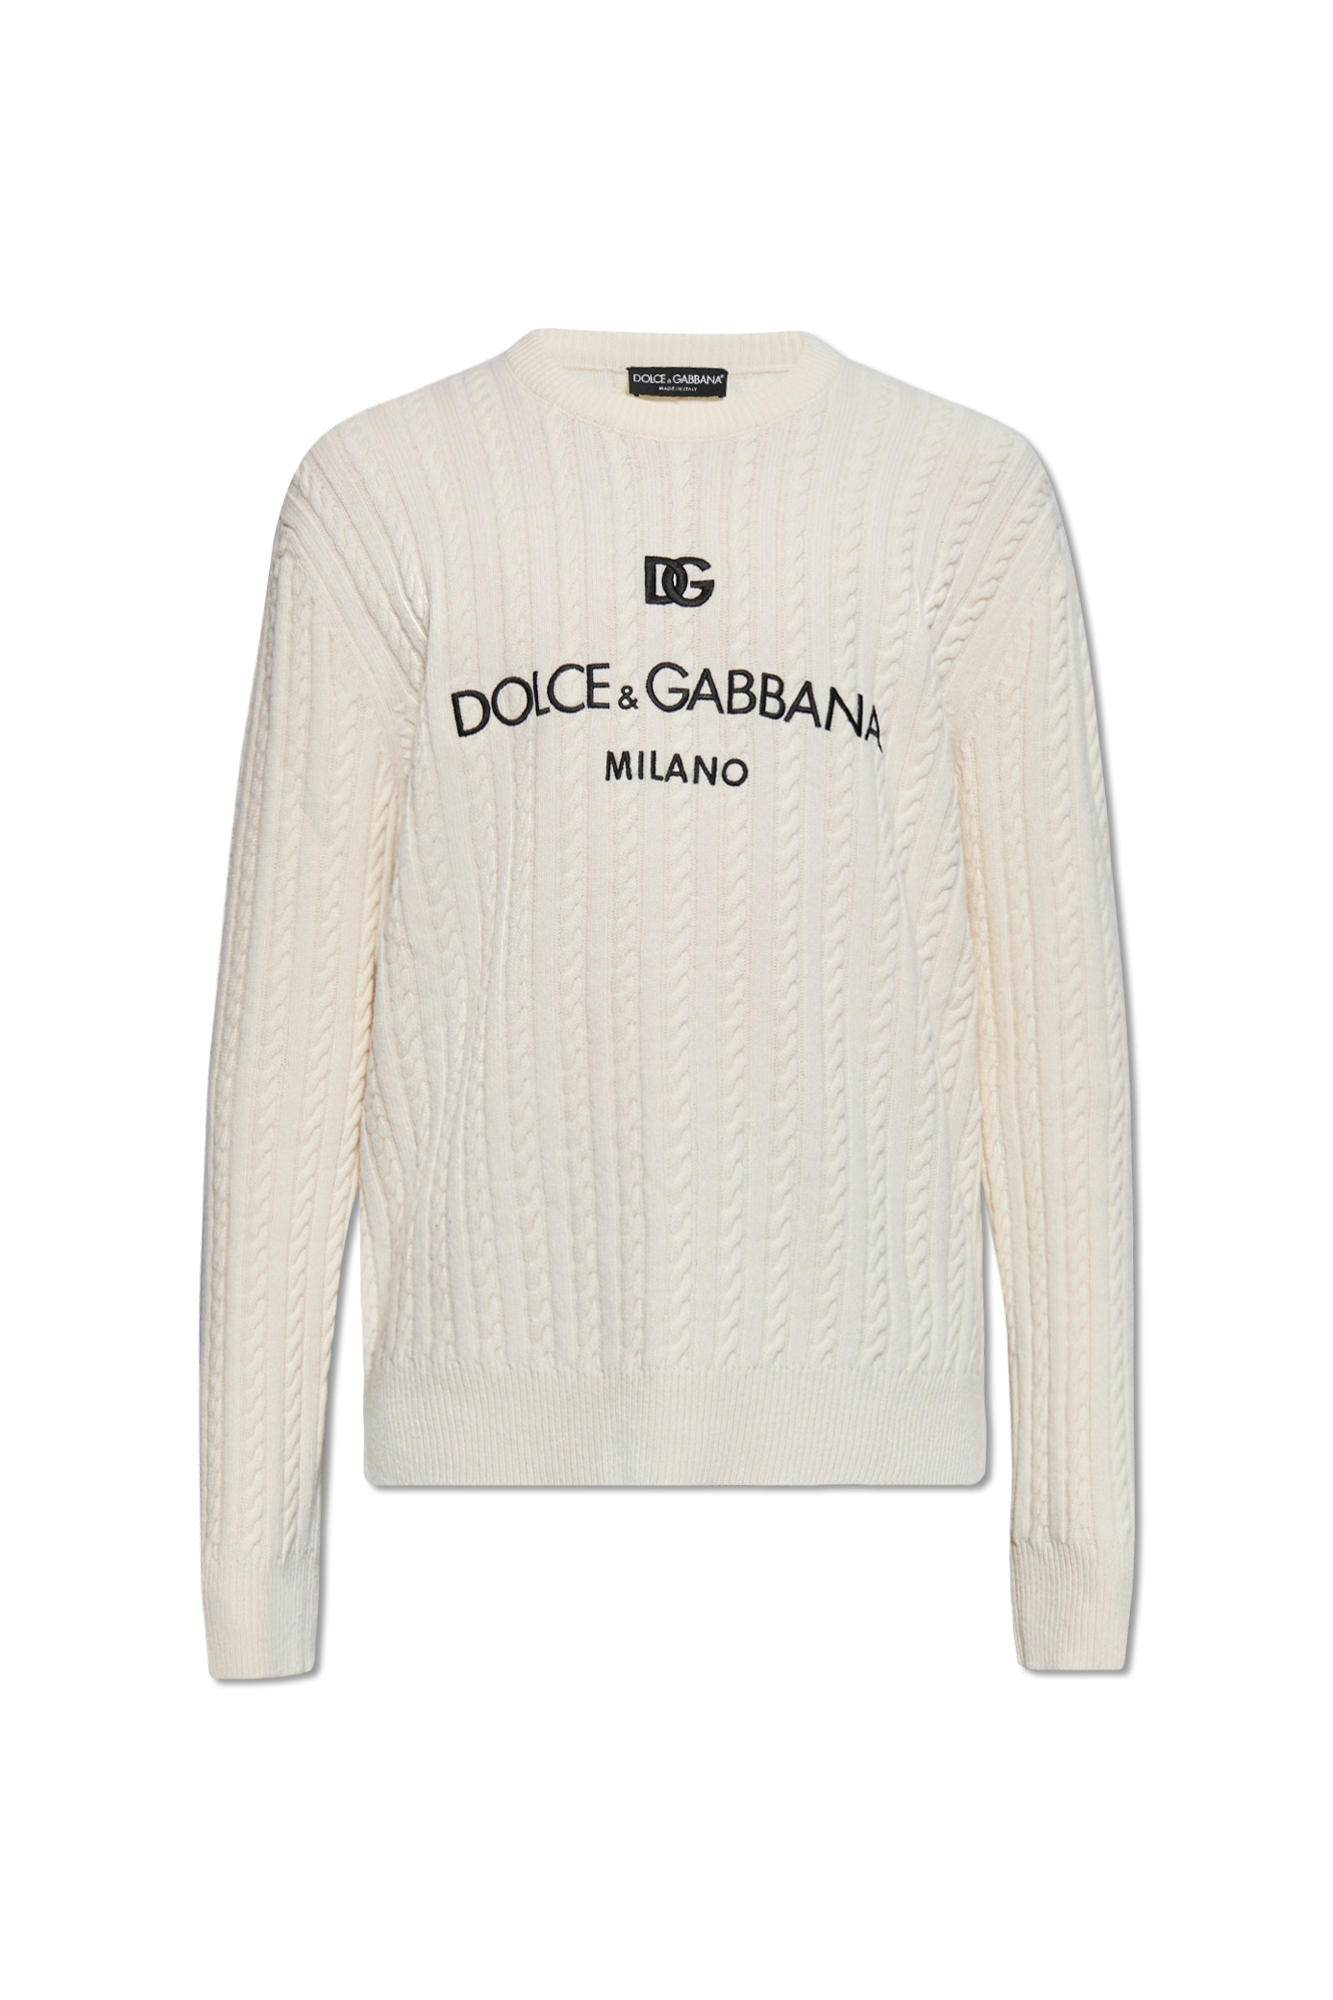 Dolce & Gabbana Sweater with logo, Men's Clothing